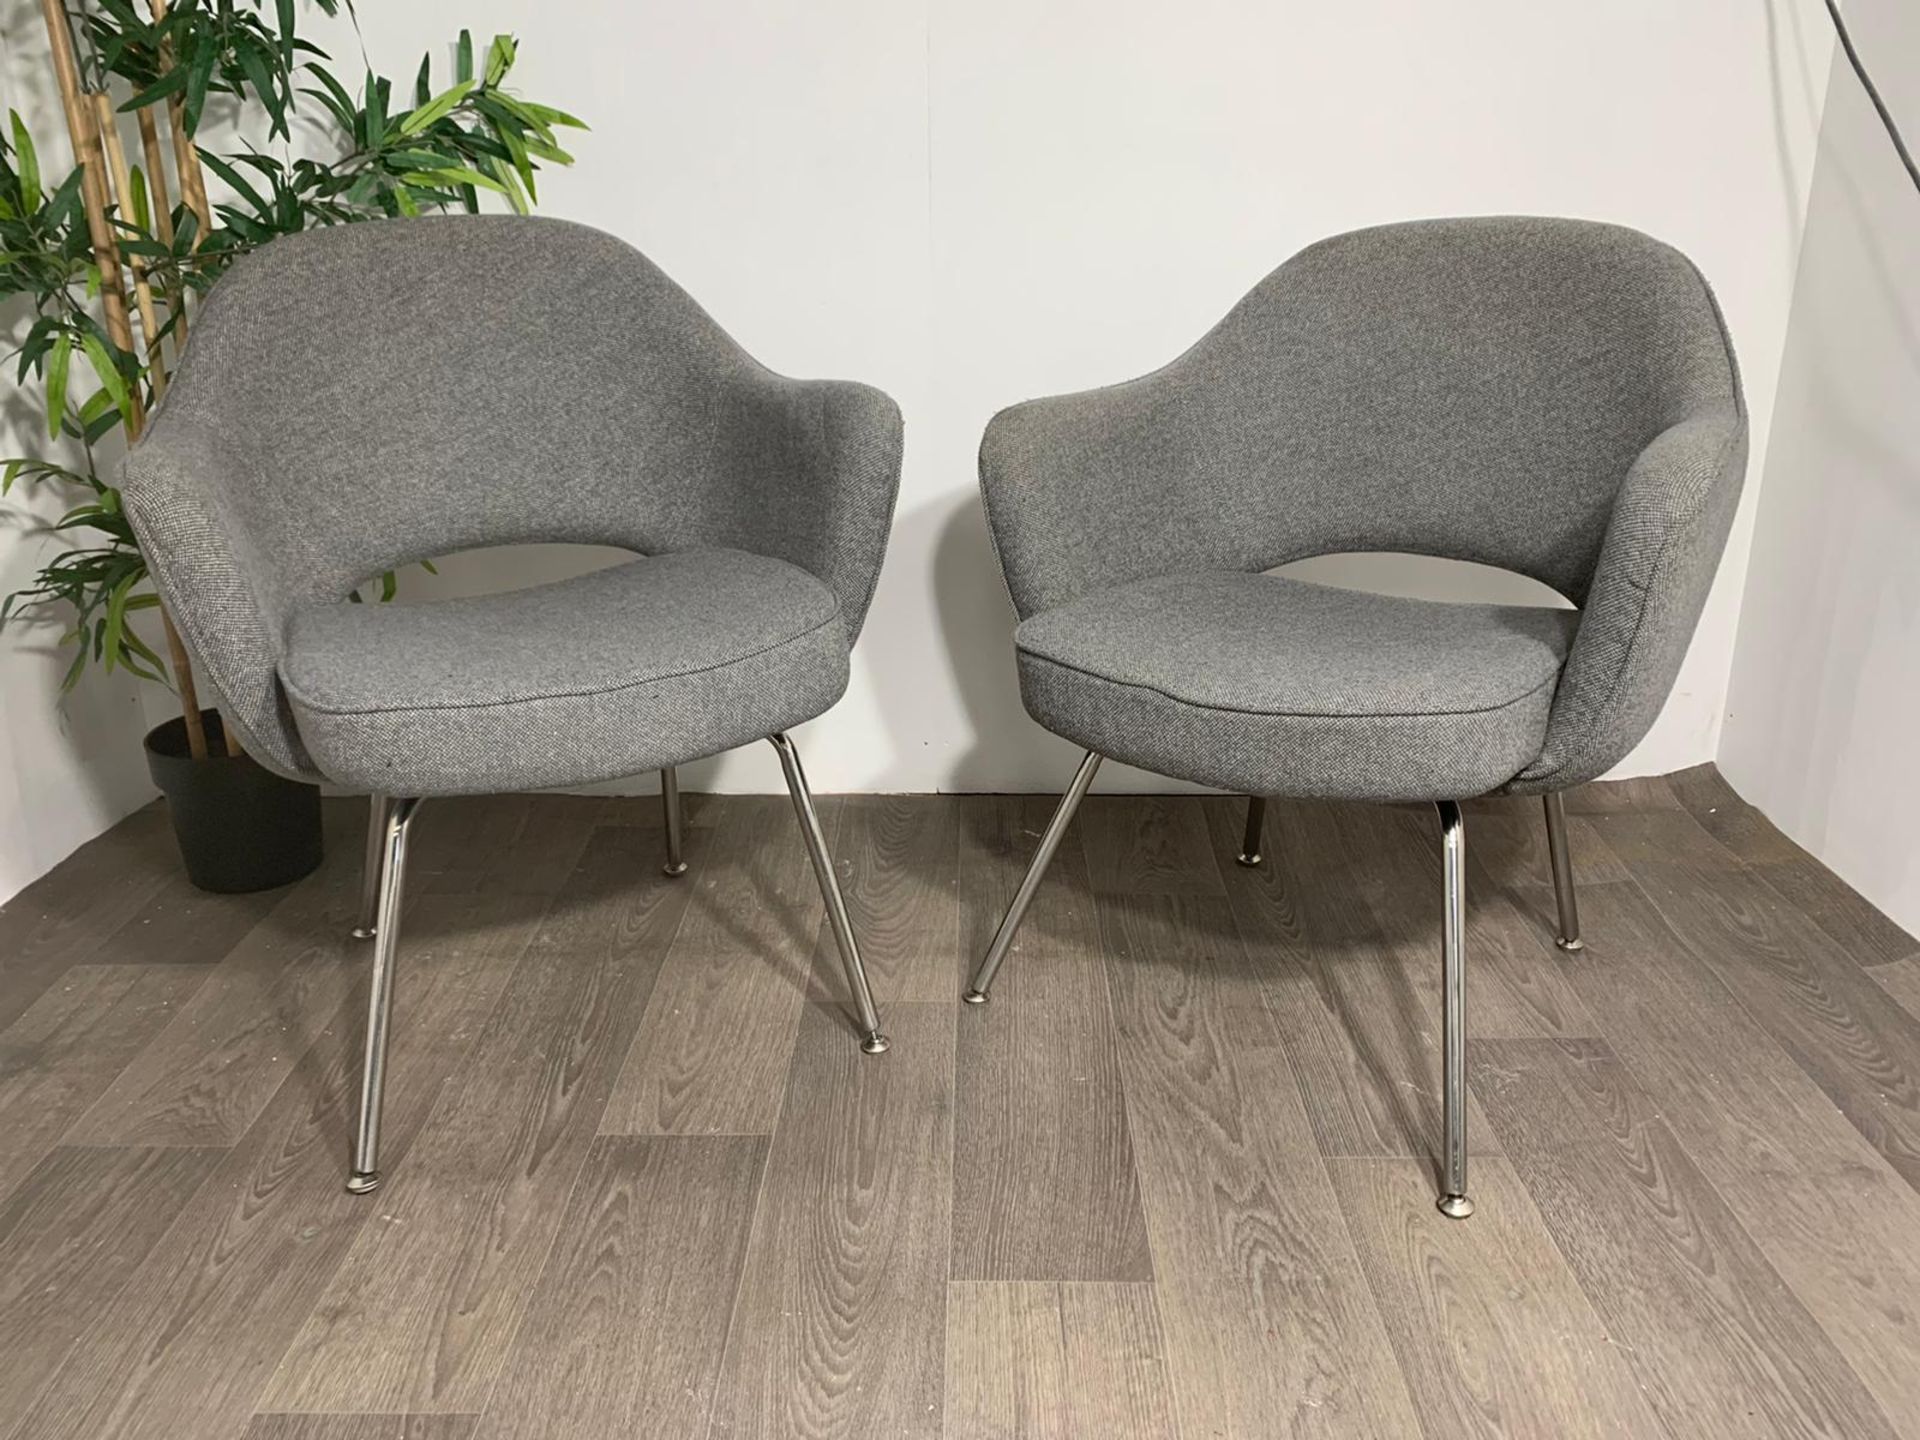 Grey Fabric Commercial Grade Chair with Chrome Legs x2 - Image 3 of 8